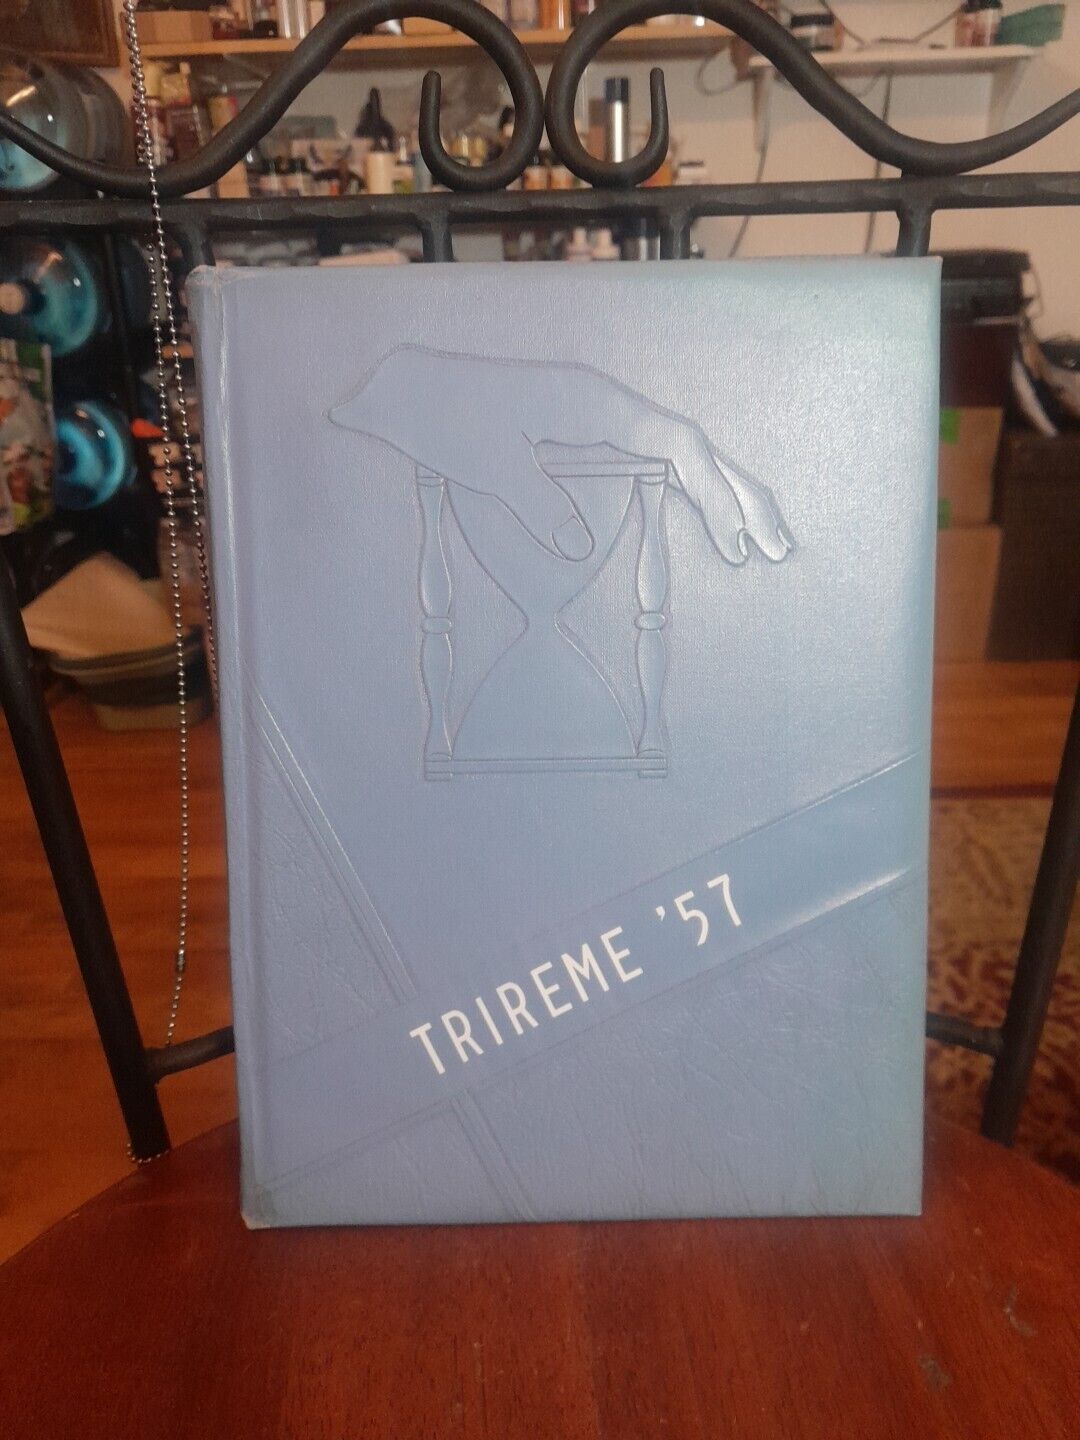 Vintage 1957 Ford City High School Trireme Yearbook 